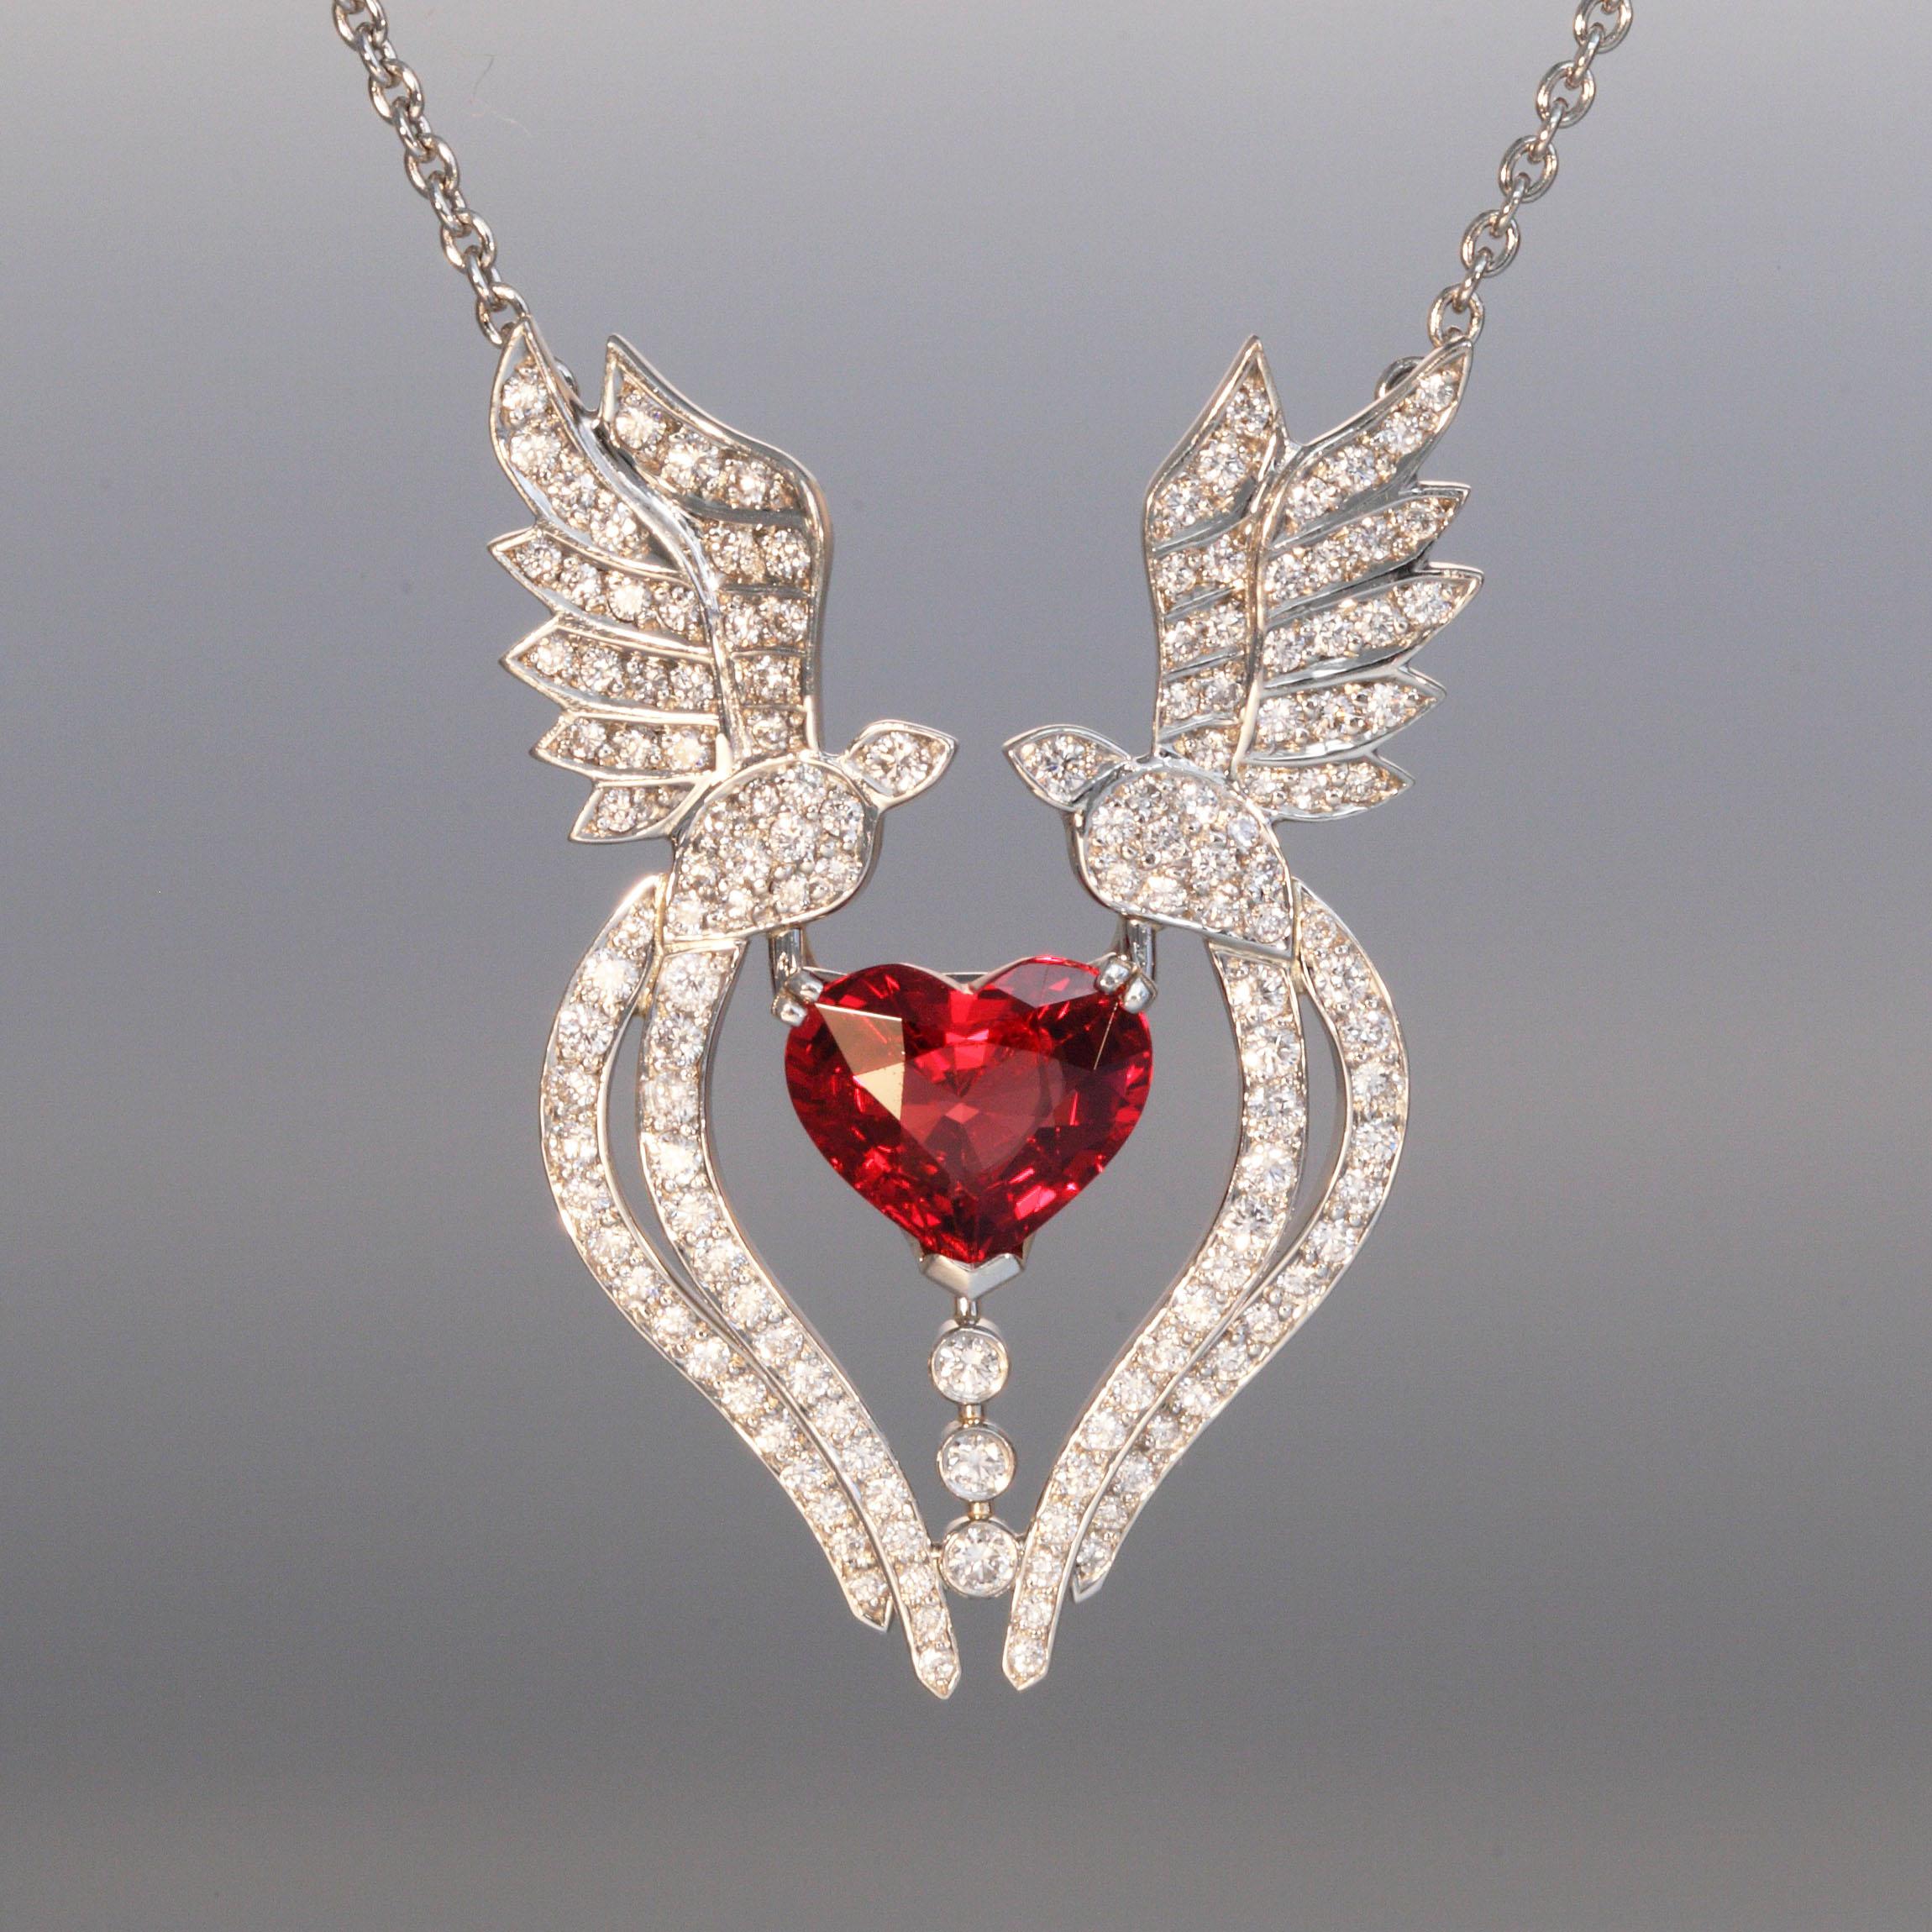 Robert Vogelsang 1.89 Carat Spinel Heart Diamond Platinum Pendant Necklace In New Condition For Sale In Zurich, CH